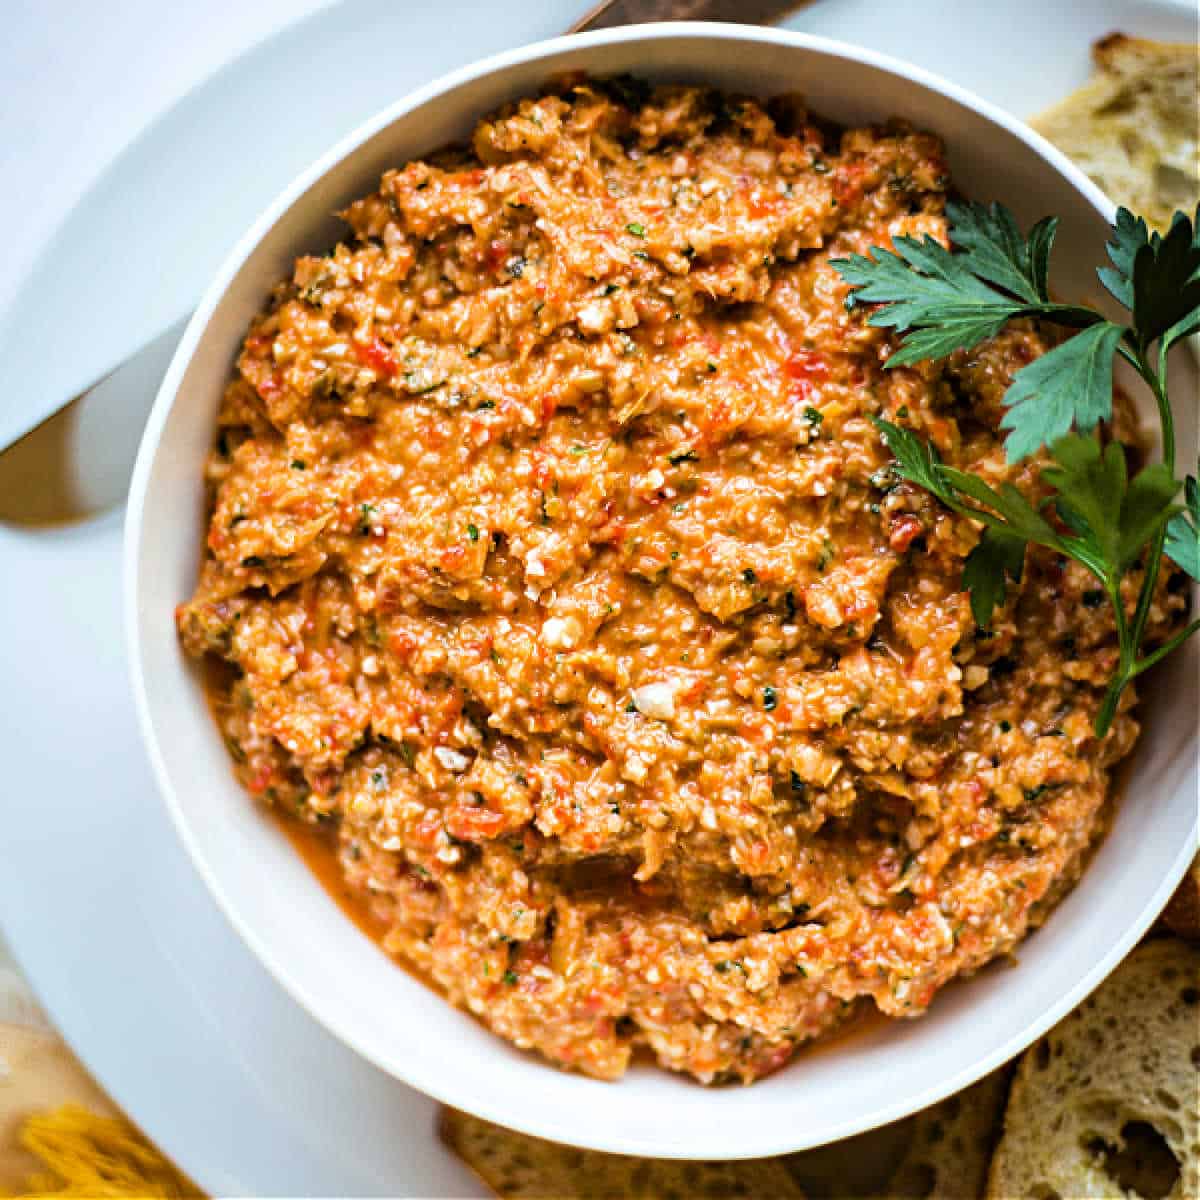 A bowl of red bell pepper tapenade on a plate